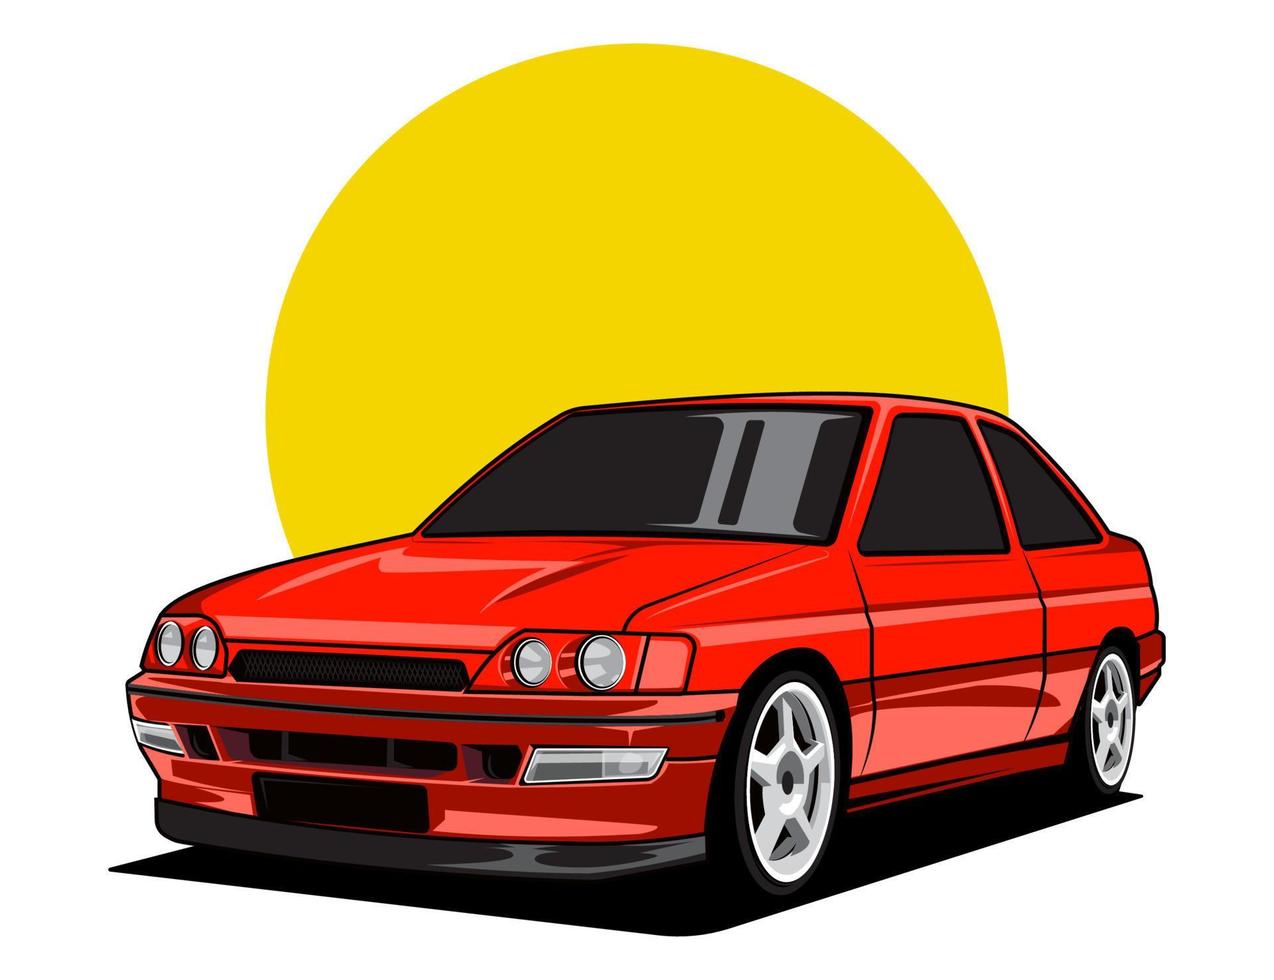 90s car manufacture in red accent for vehicle vector illustration design graphic